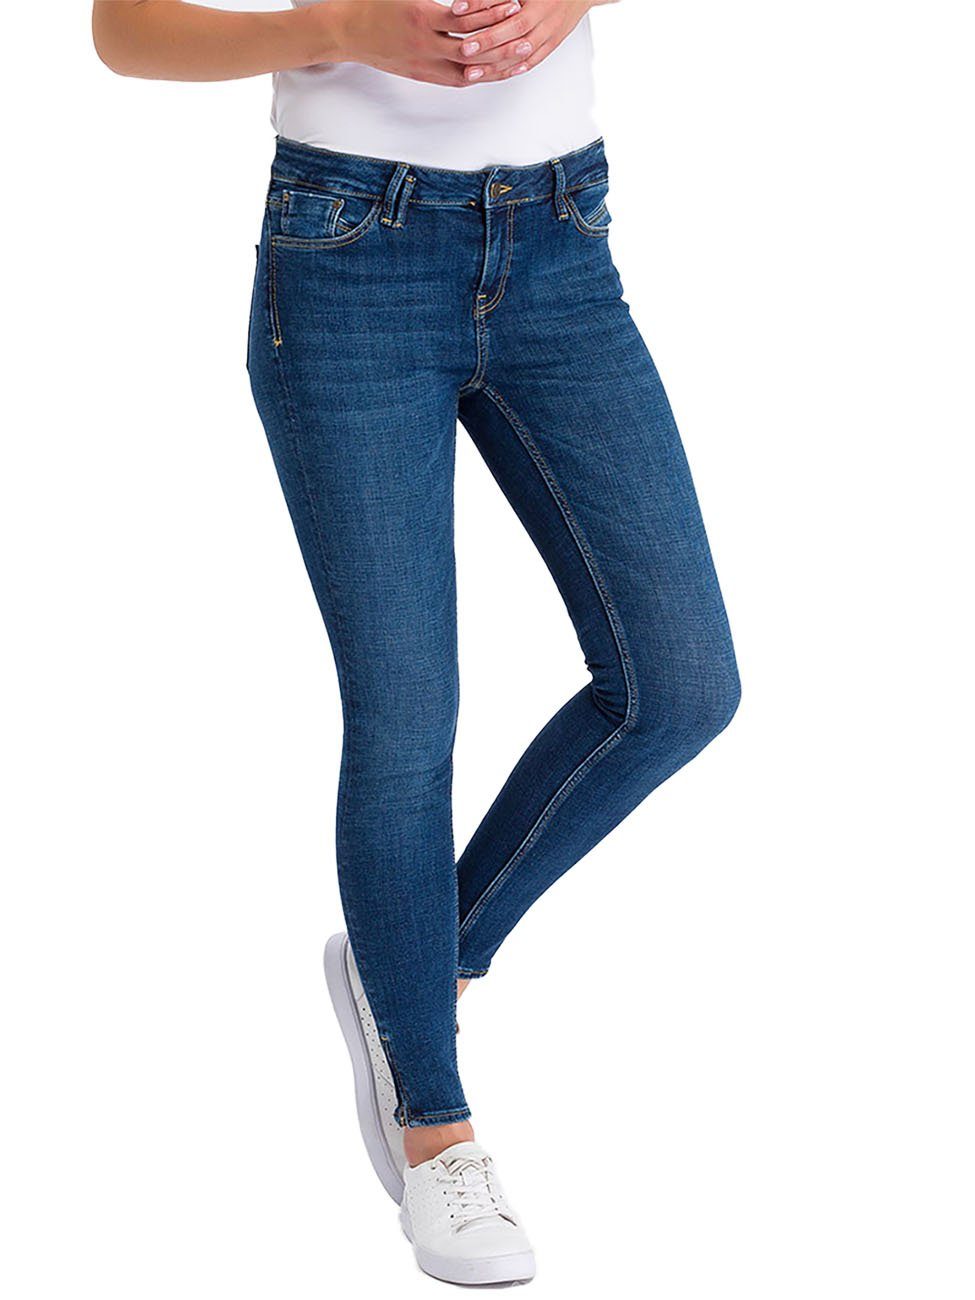 Cross Jeans® Skinny-fit-Jeans »Giselle« Jeanshose mit Stretch online kaufen  | OTTO